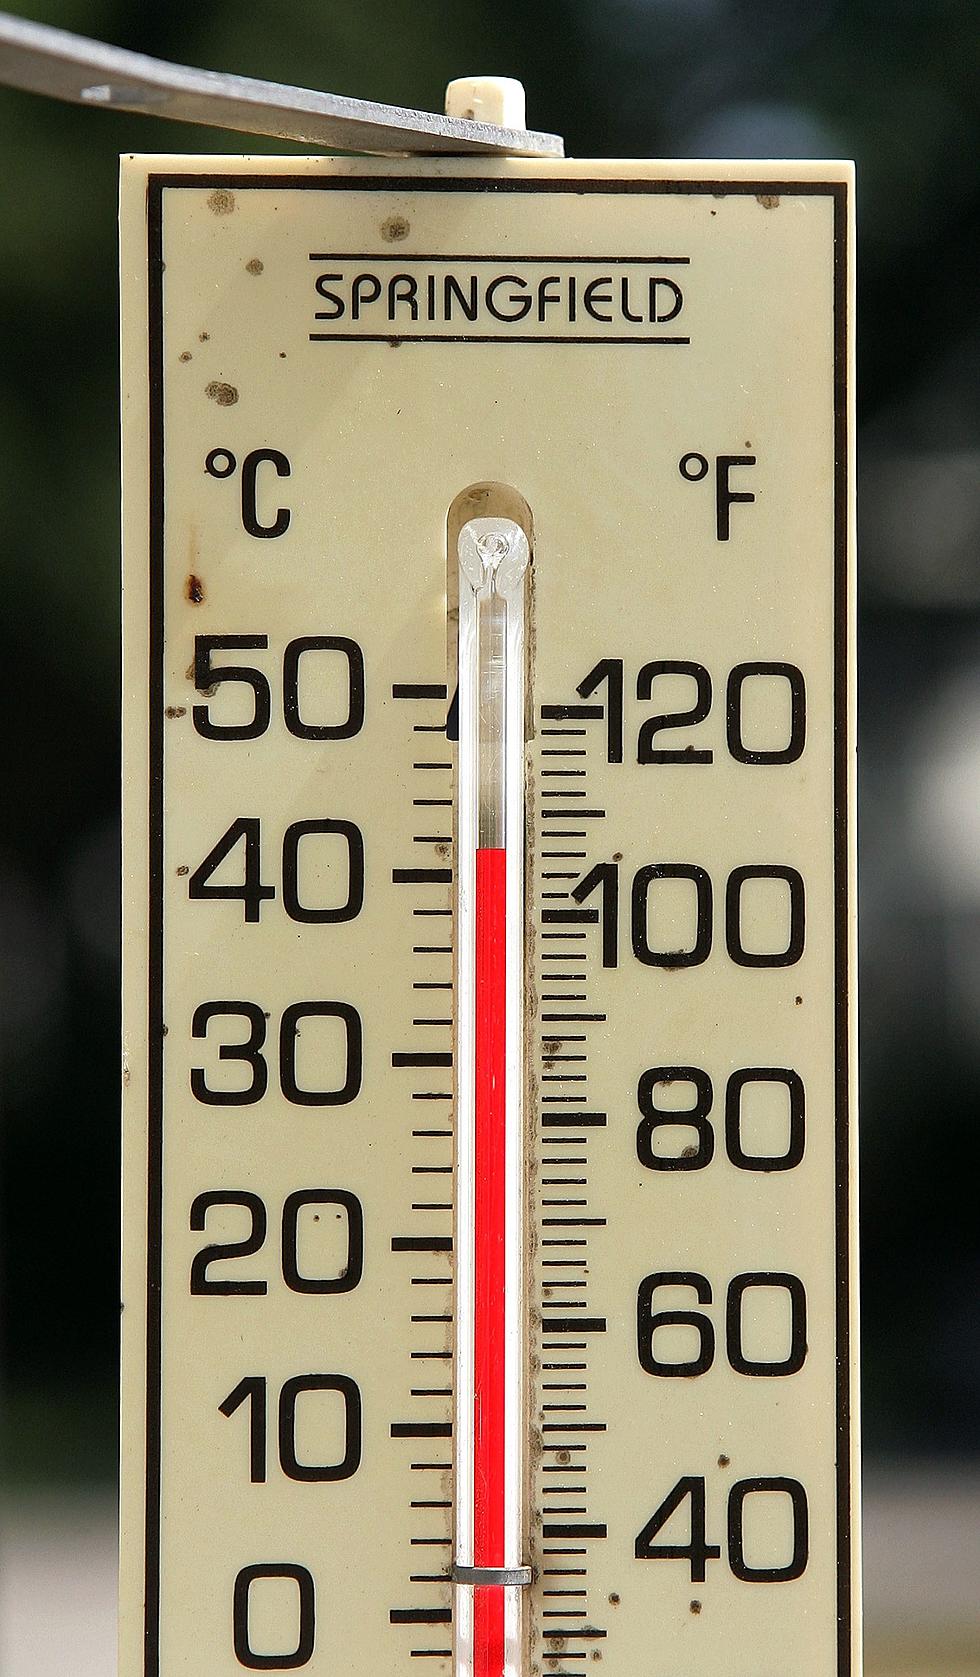 Vermont Man Walked Through Town Naked Because “It’s Very Hot”